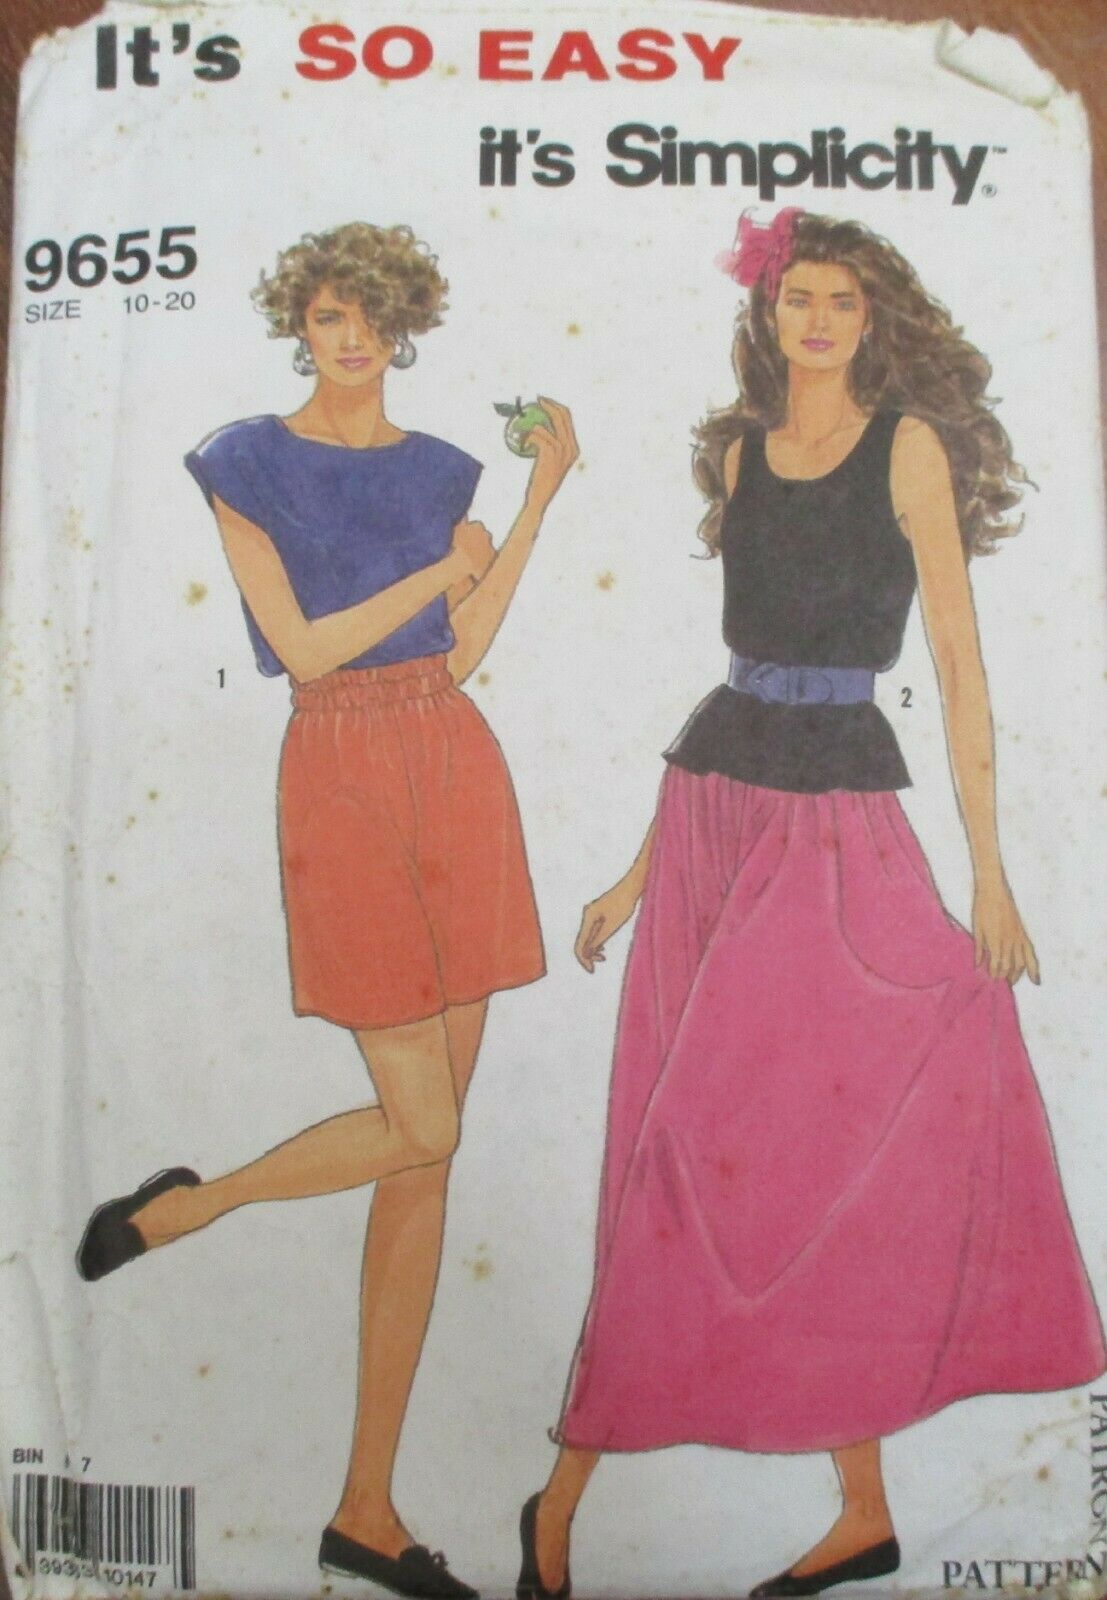 Simplicity 9655 It's So Easy Misses Pull Over Tops, Skirt & Shorts Pattern Size - $6.72